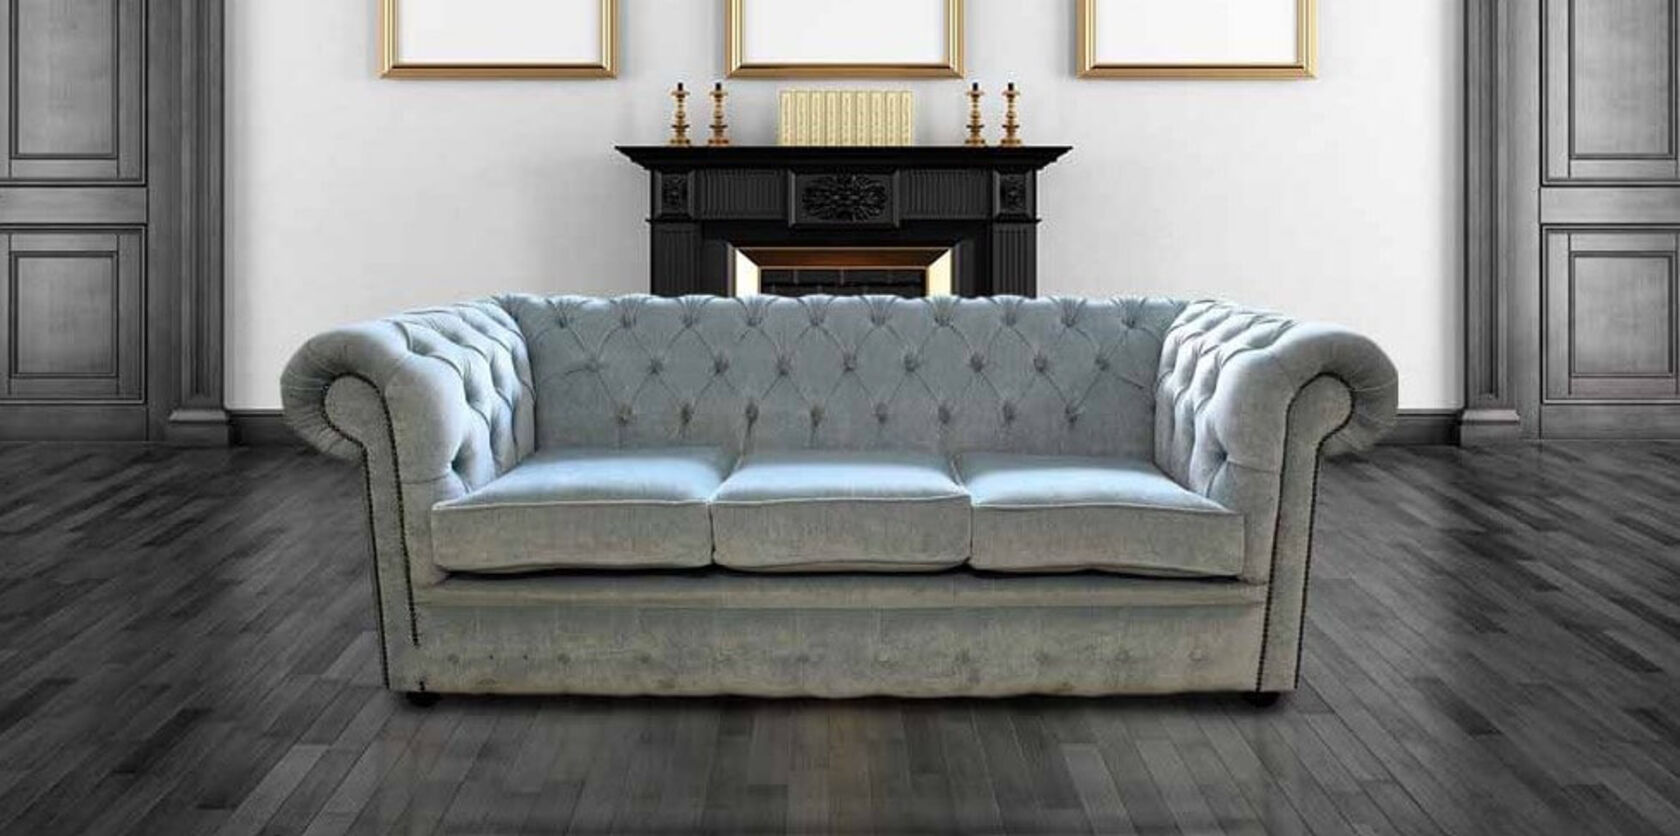 Duck Egg Blue Fabric Chesterfield, Leather Sofa Duck Egg Blue